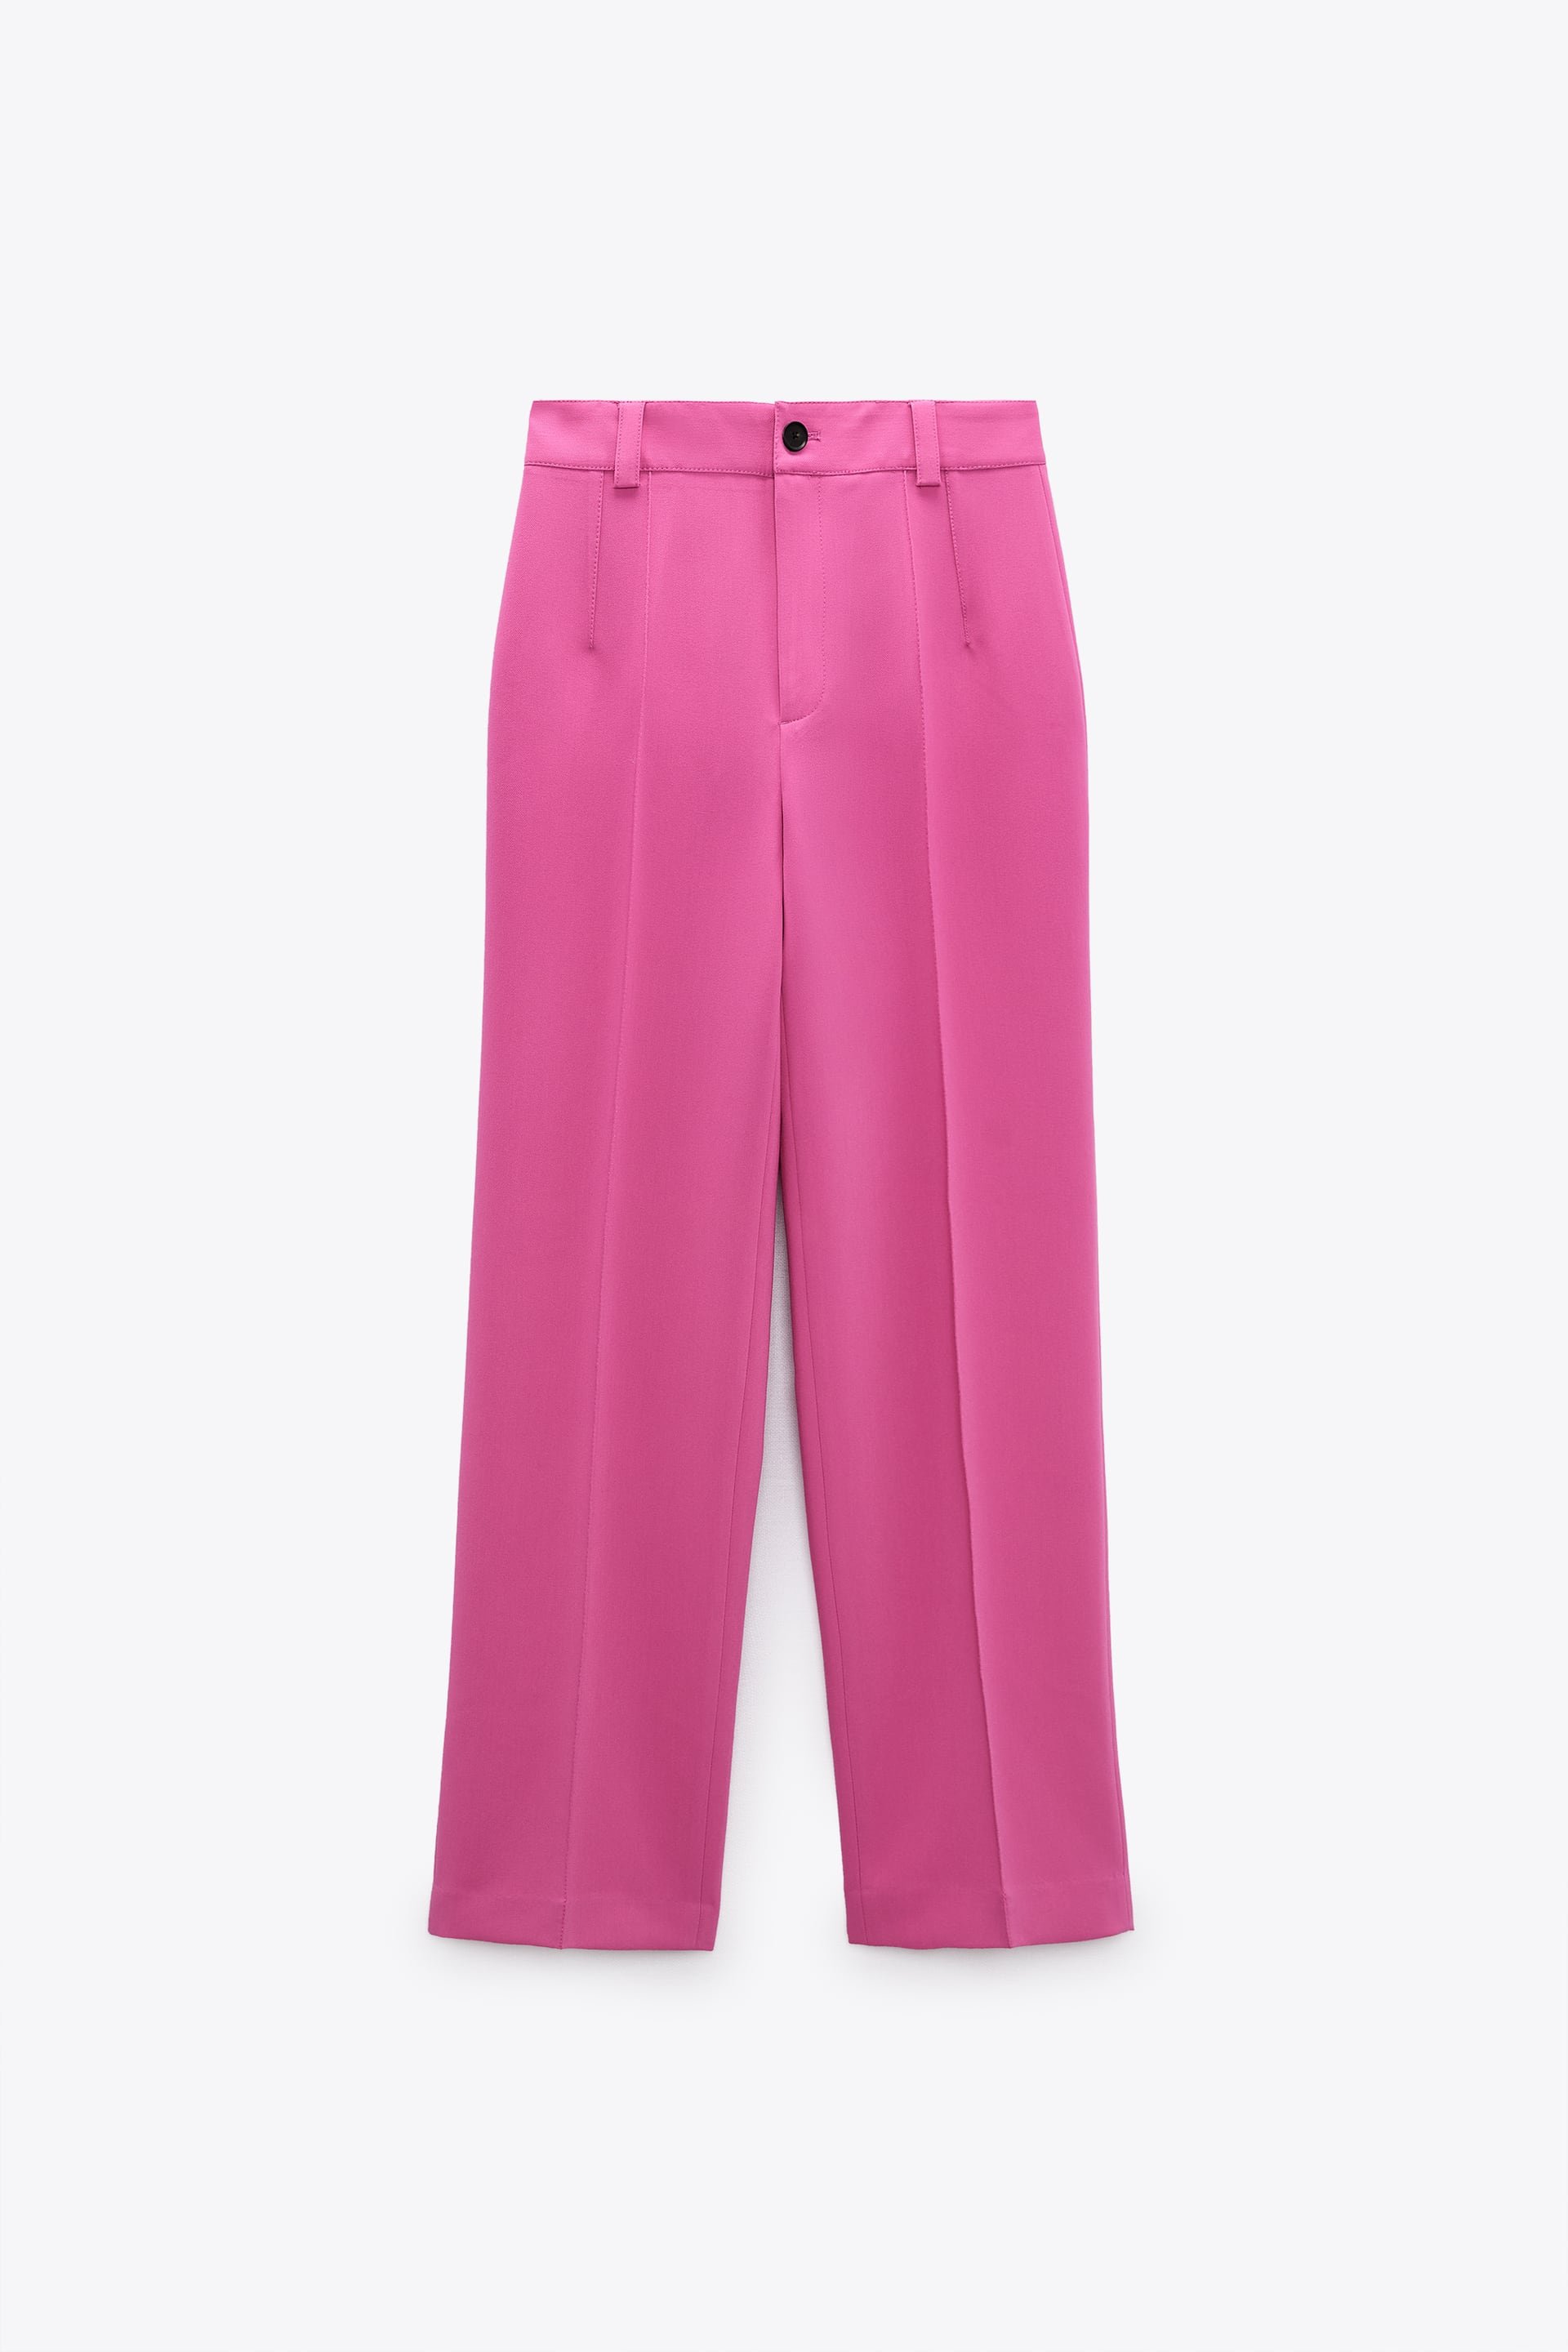 Zara Françoise Full Length Trousers in Pink — UFO No More